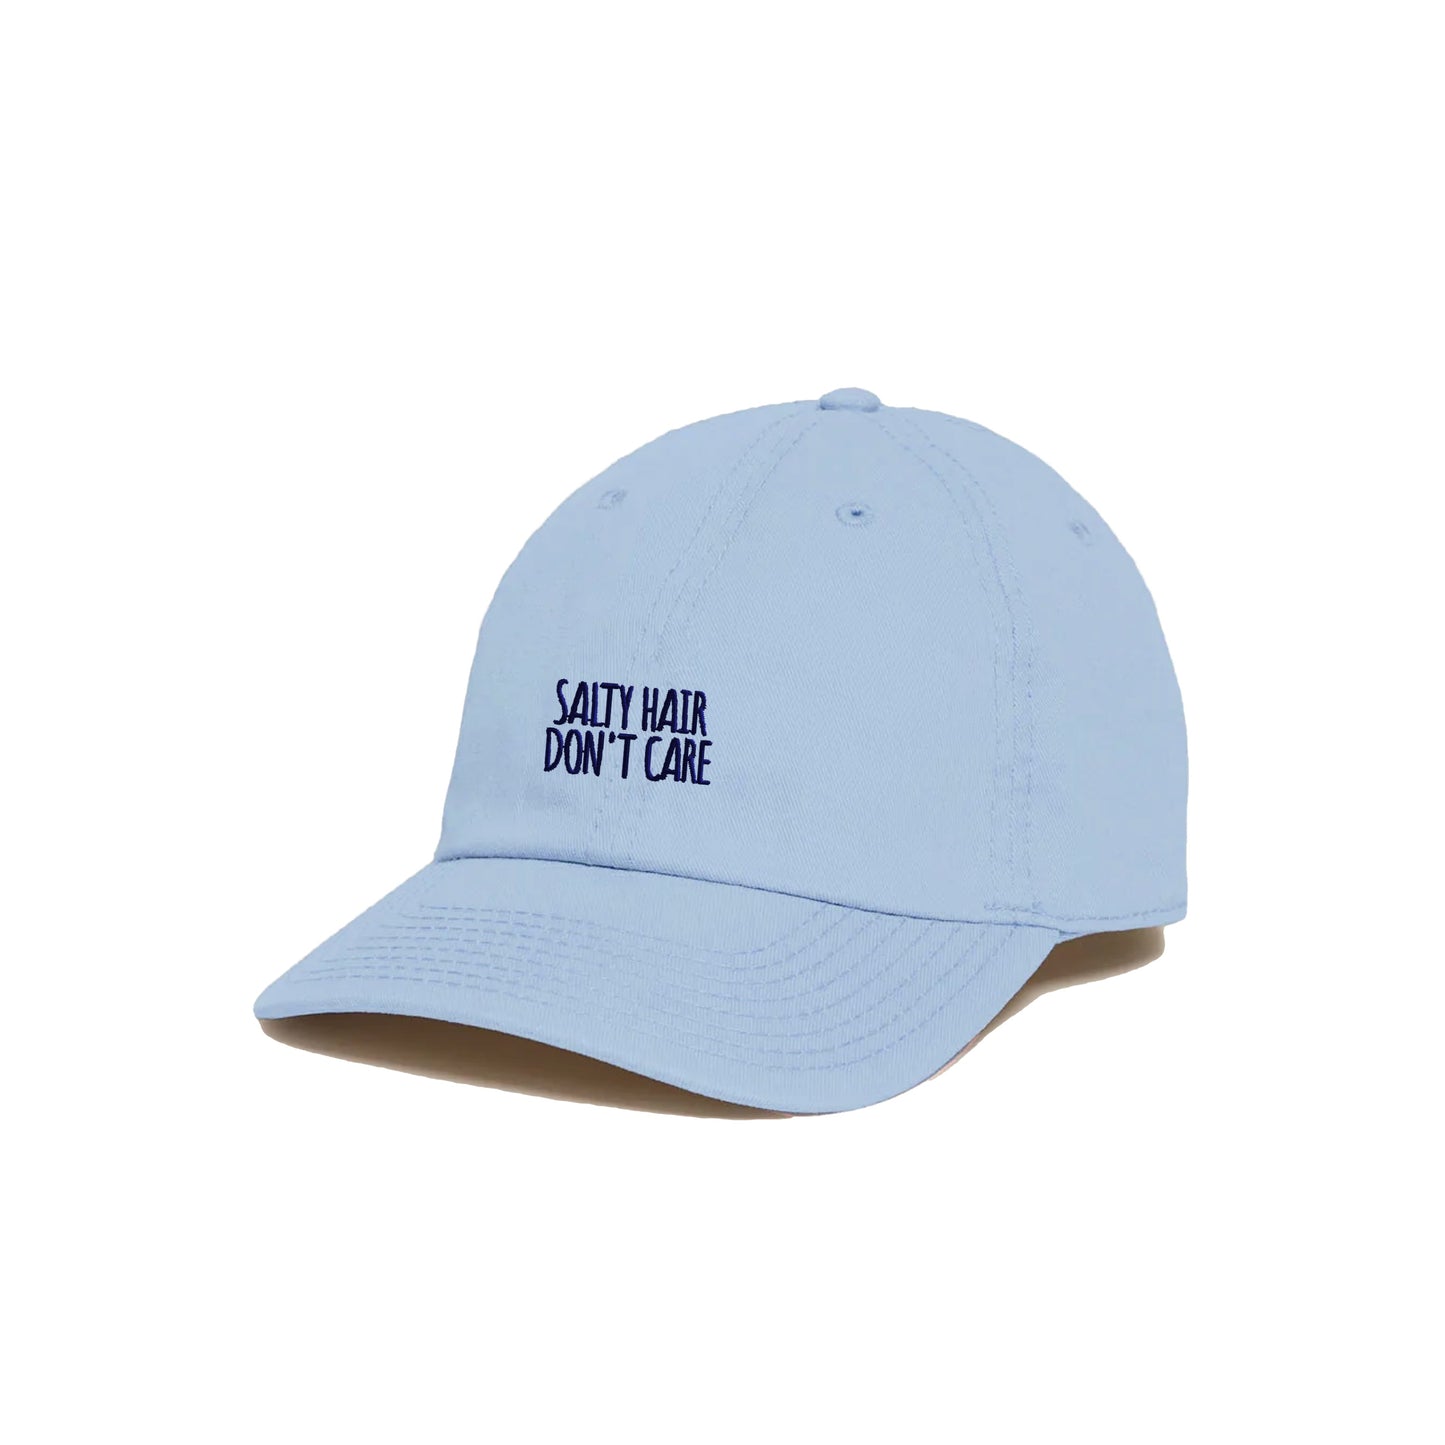 Salty hair don't care Cap, solid light blue fabric, adjustable strap-back closure. 6 Panel Dad Cap. 100% cotton.